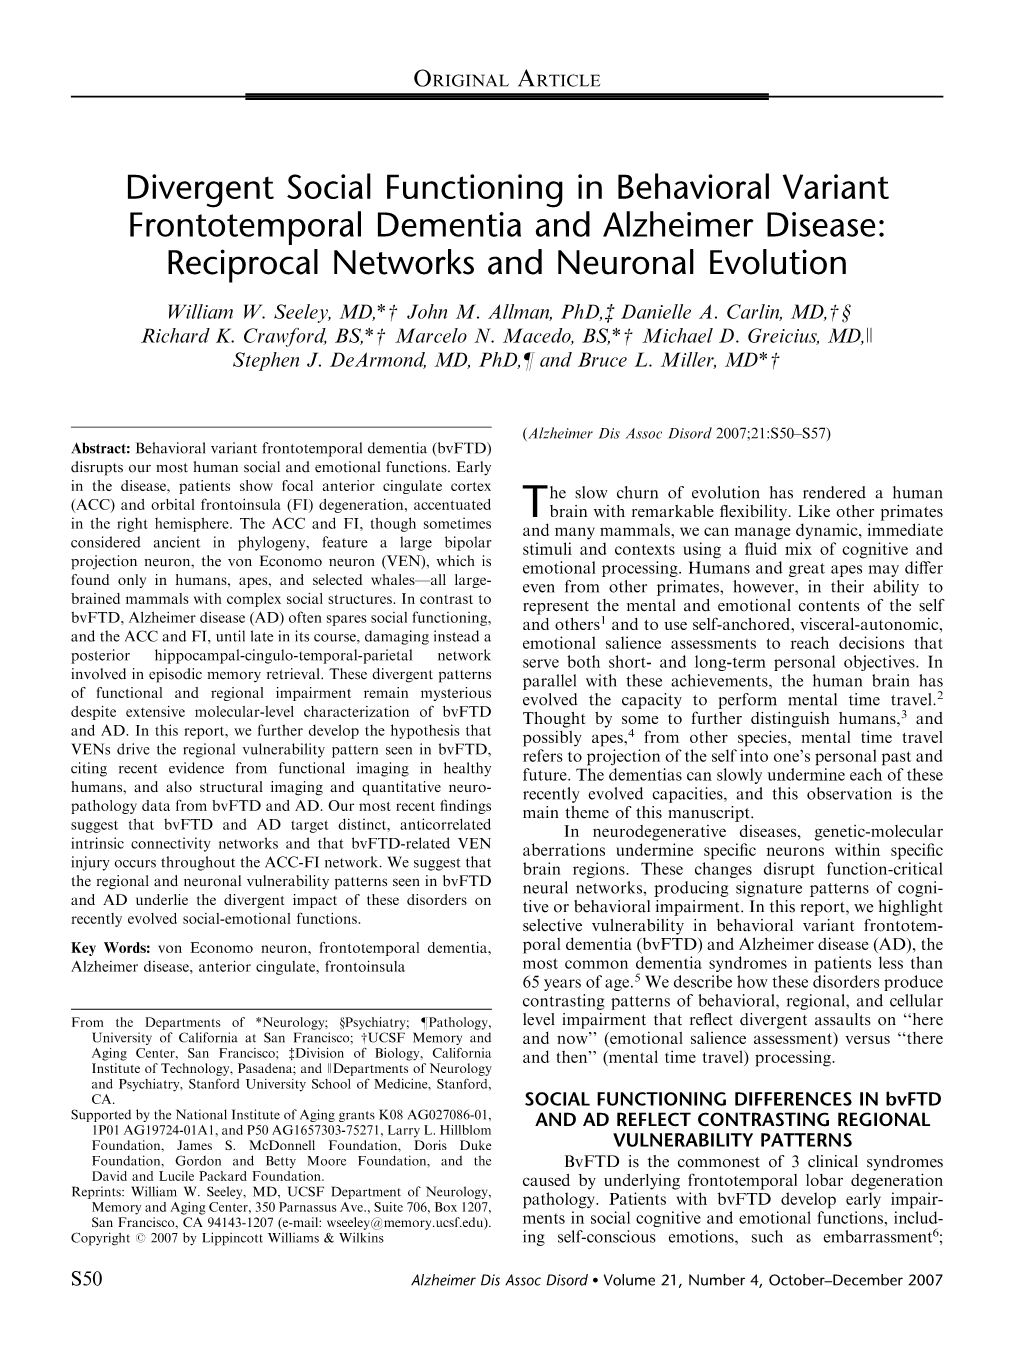 Divergent Social Functioning in Behavioral Variant Frontotemporal Dementia and Alzheimer Disease: Reciprocal Networks and Neuronal Evolution William W